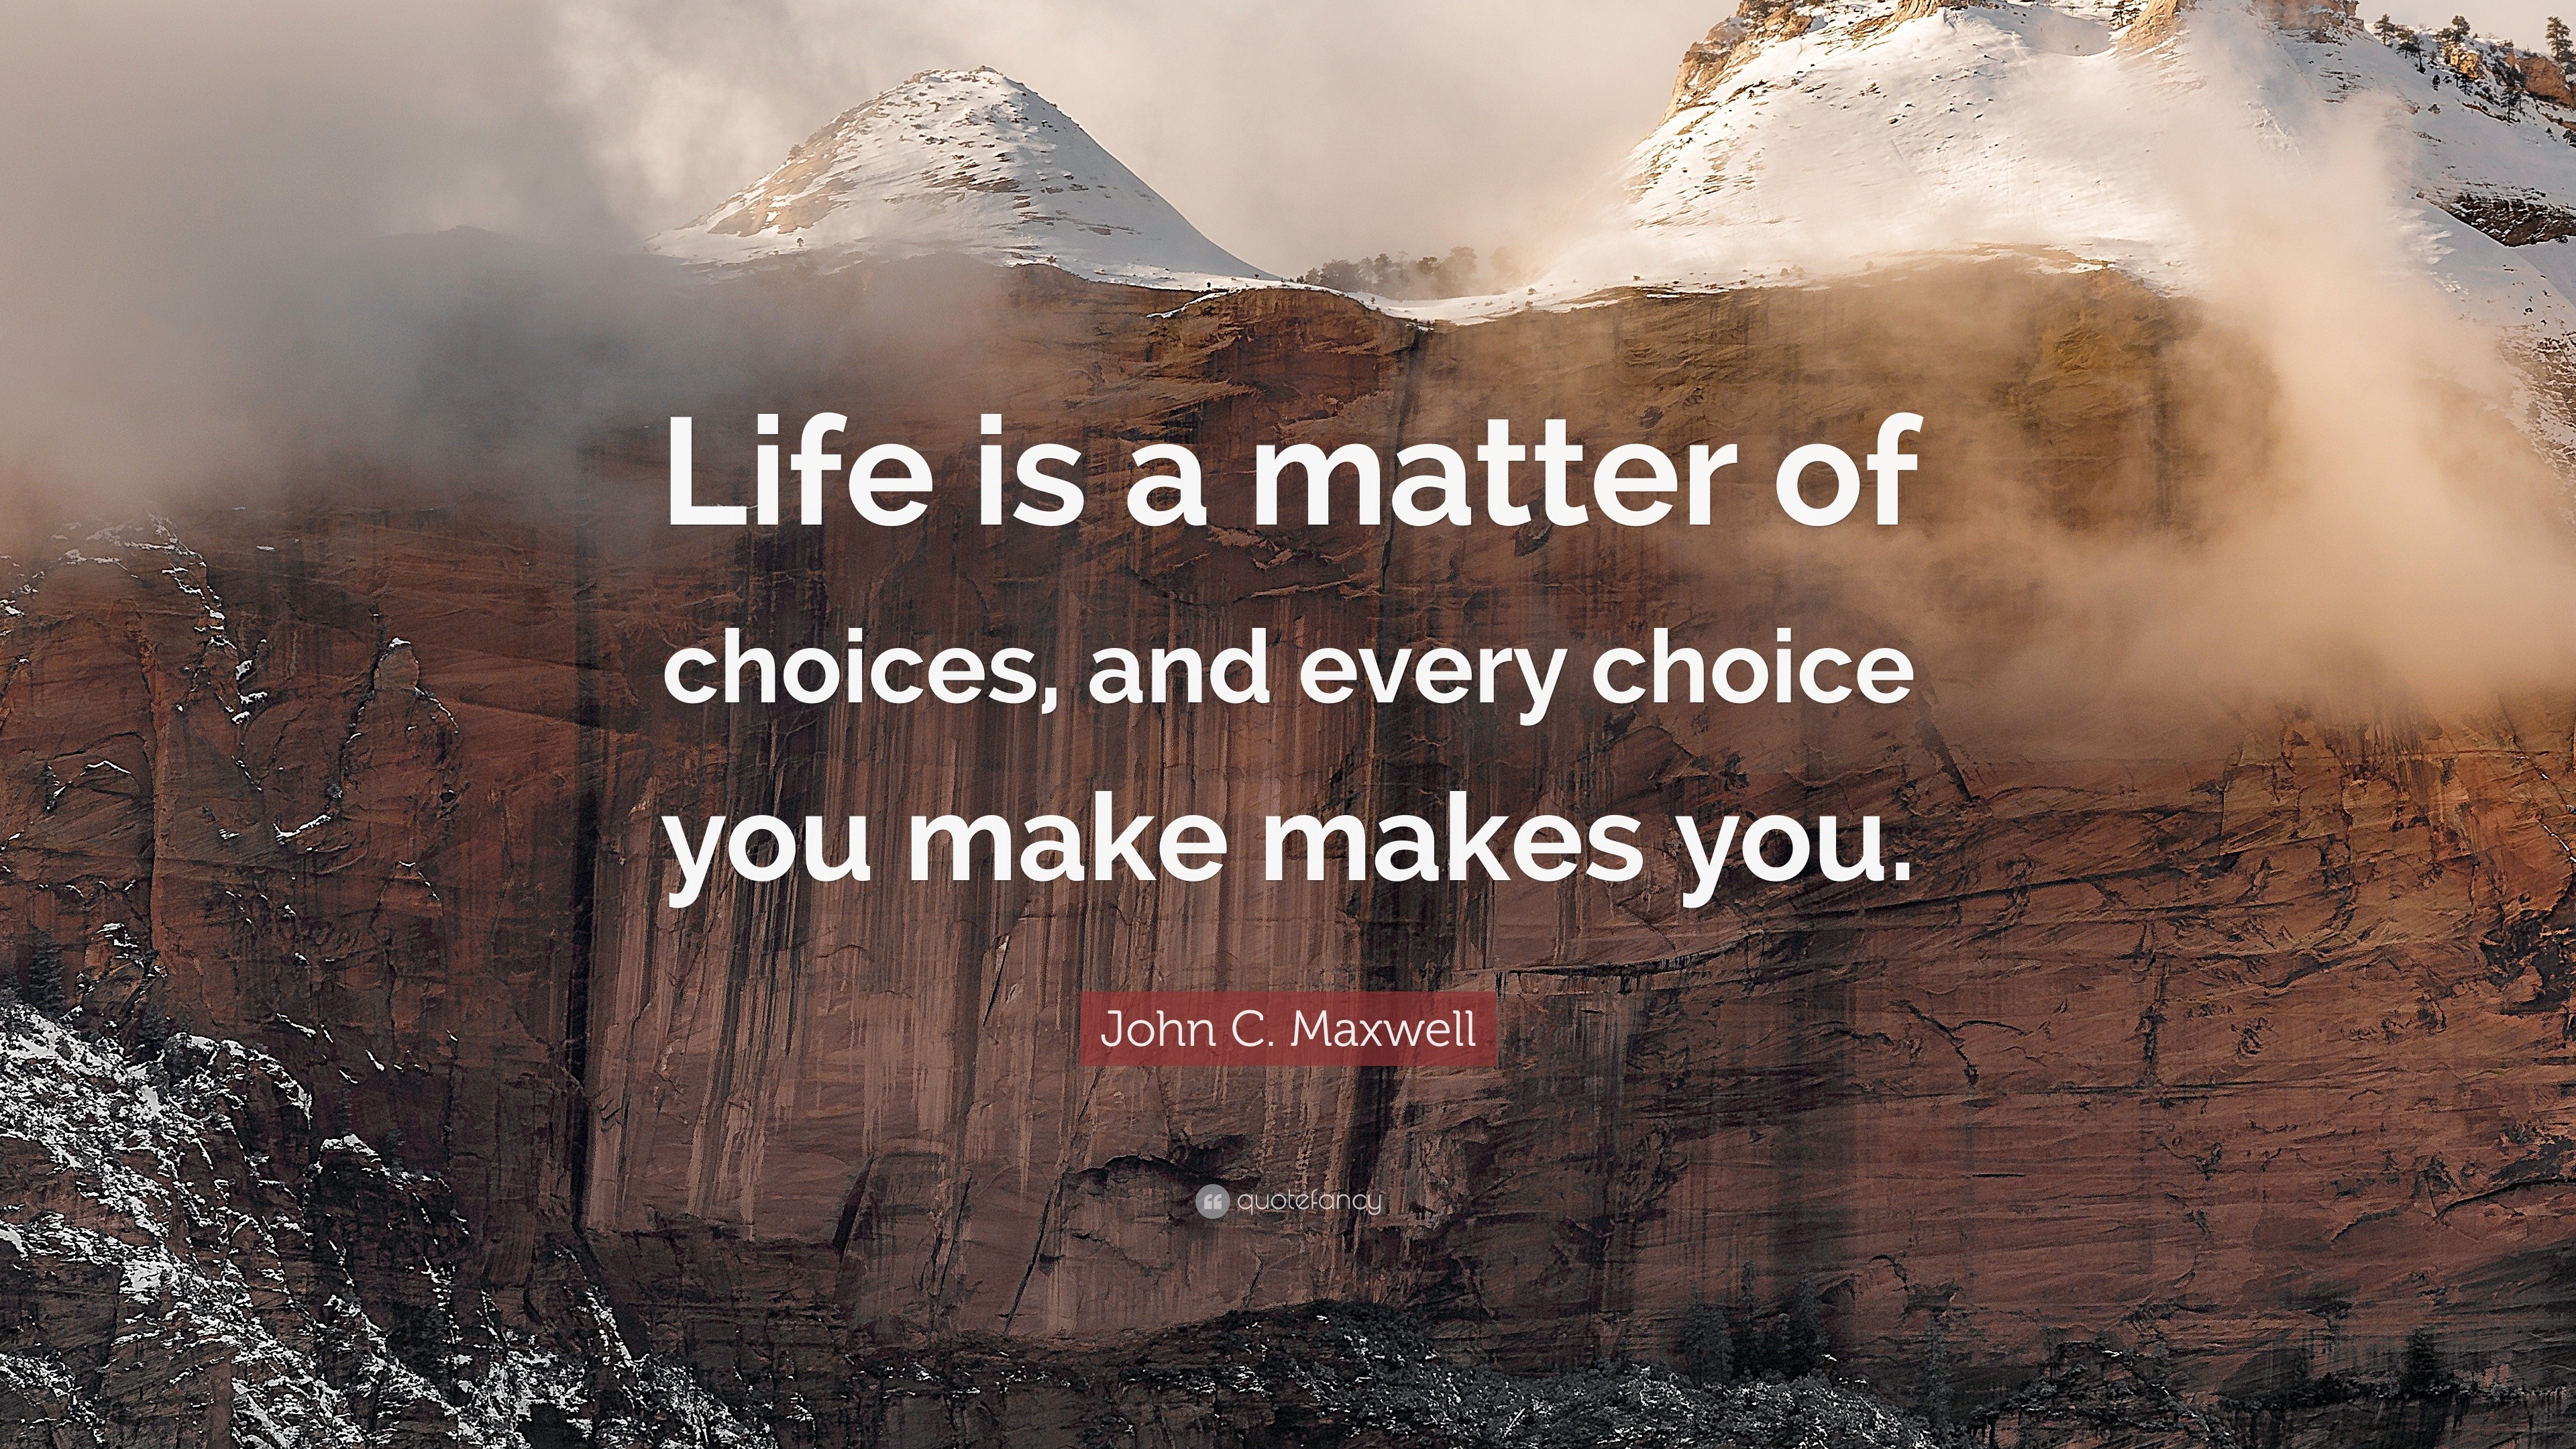 John C Maxwell Quote “Life is a matter of choices and every